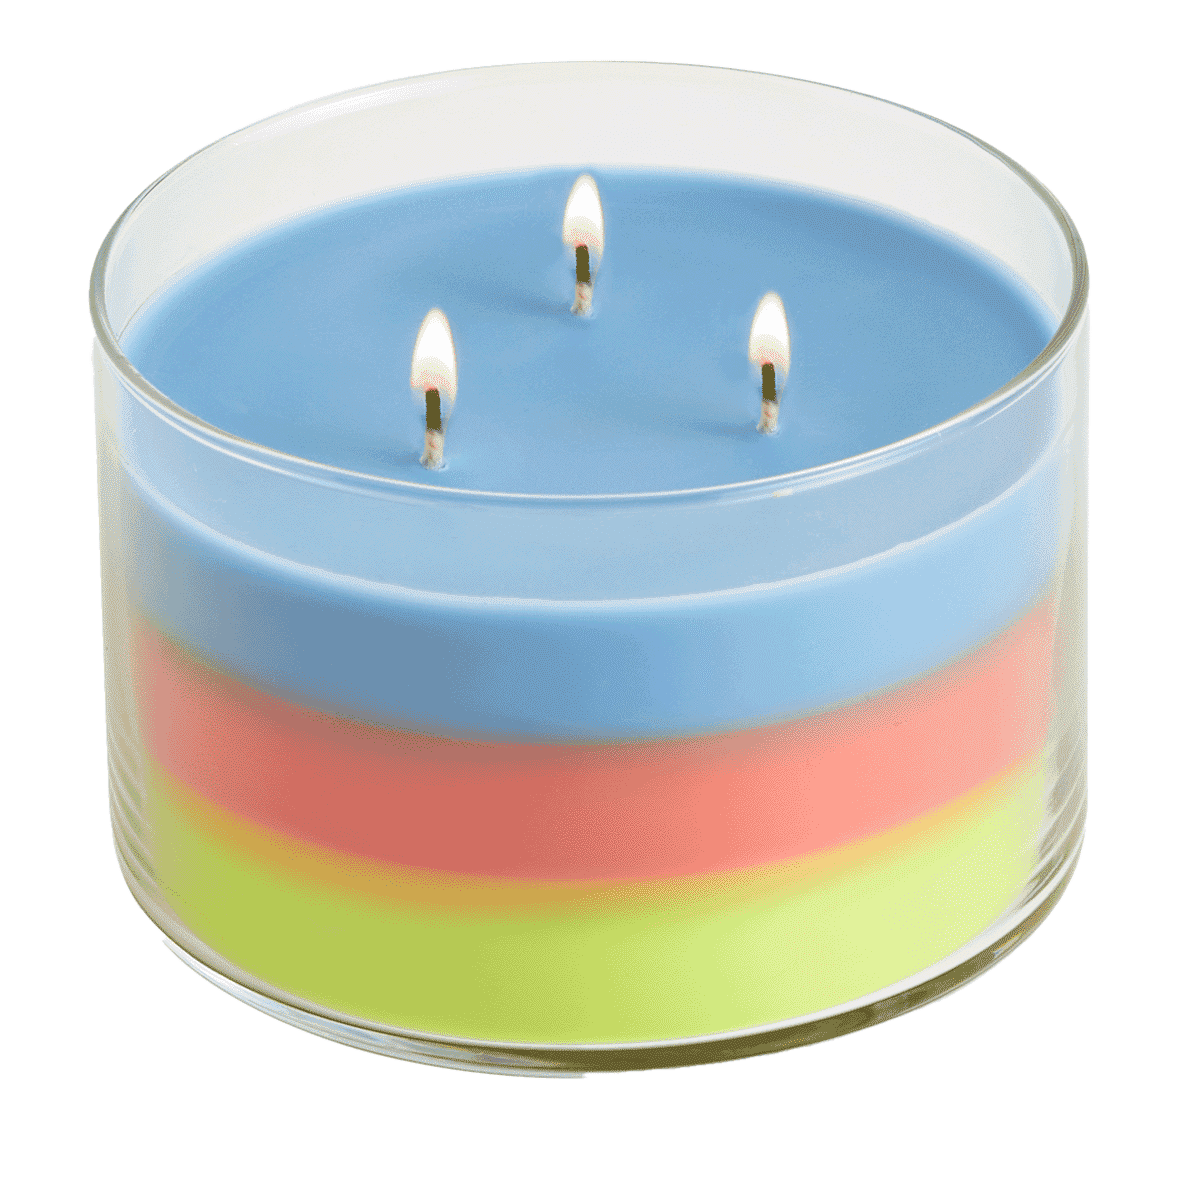 New Rituals Layered 3 Wick Jar Candle - PartyLite US